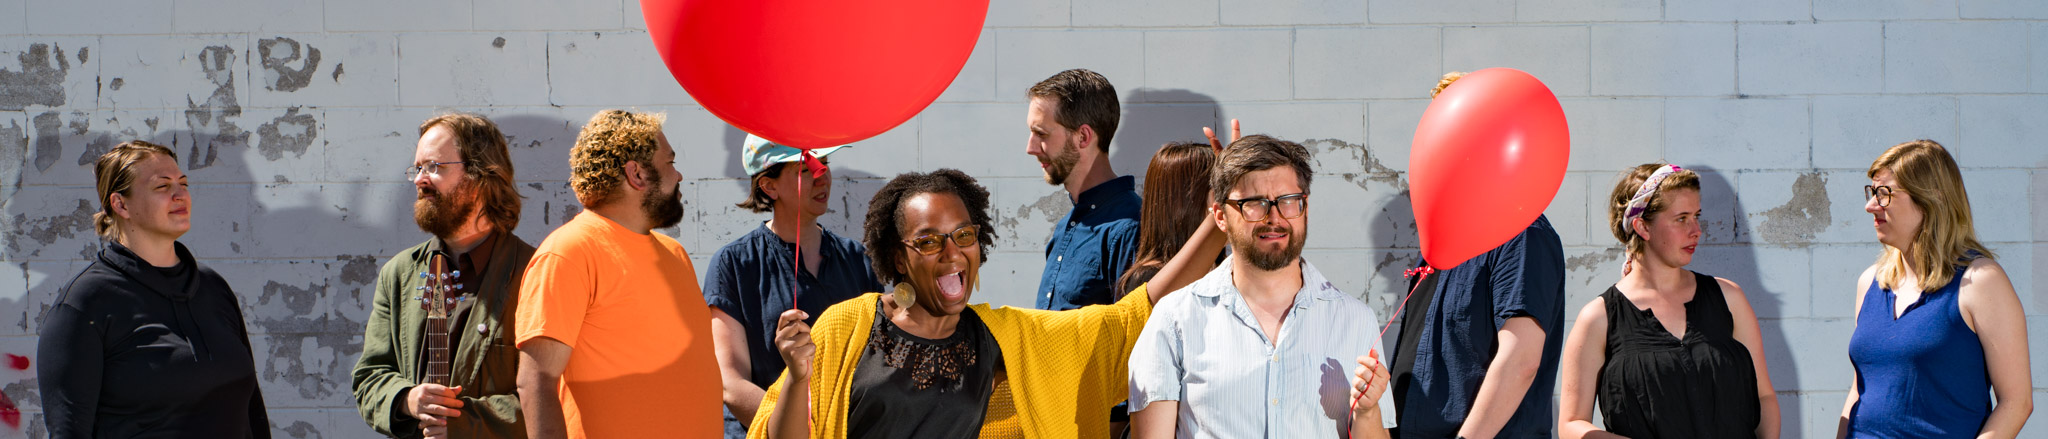 A bunch of improvisers expressing different emotions, two of them holding red balloons.